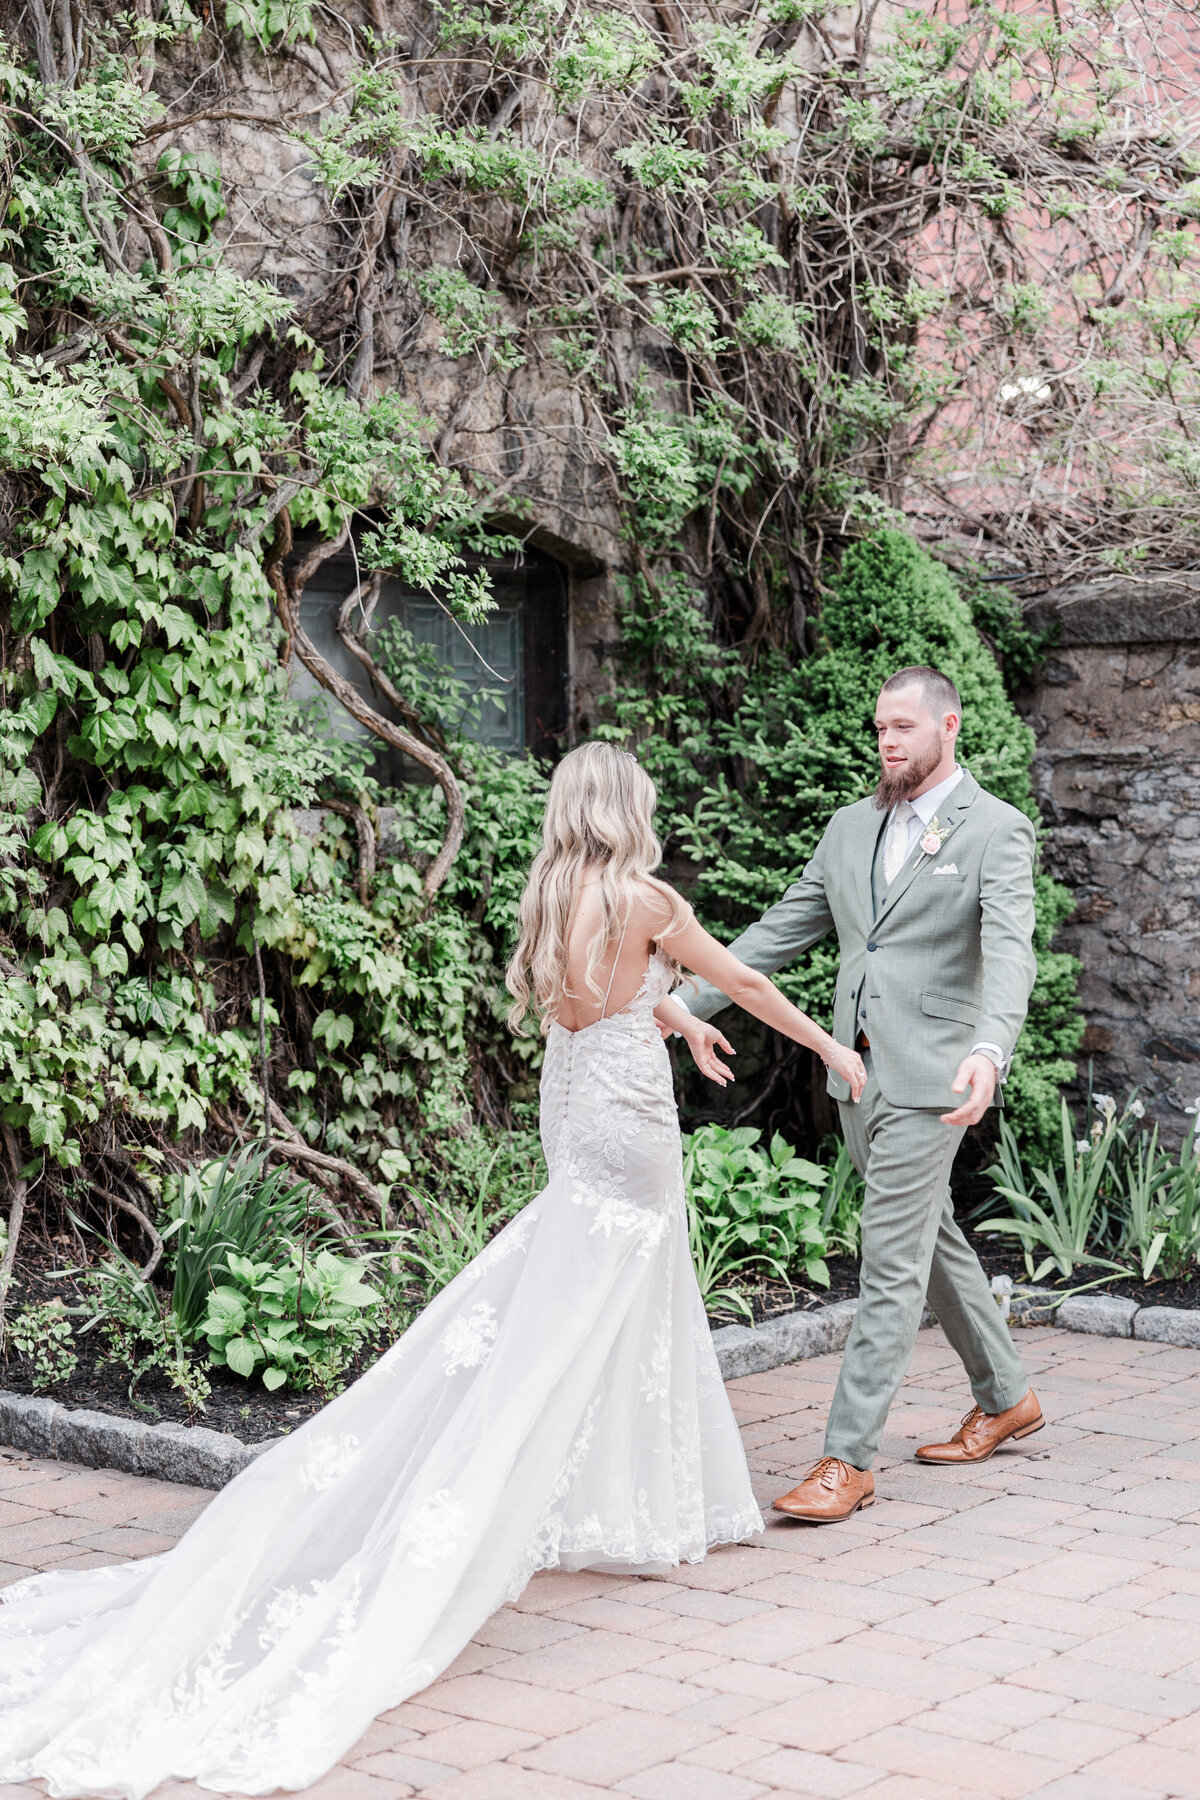 wedding-photography-at-saint-clements-castle-in-portland-connecticut-44